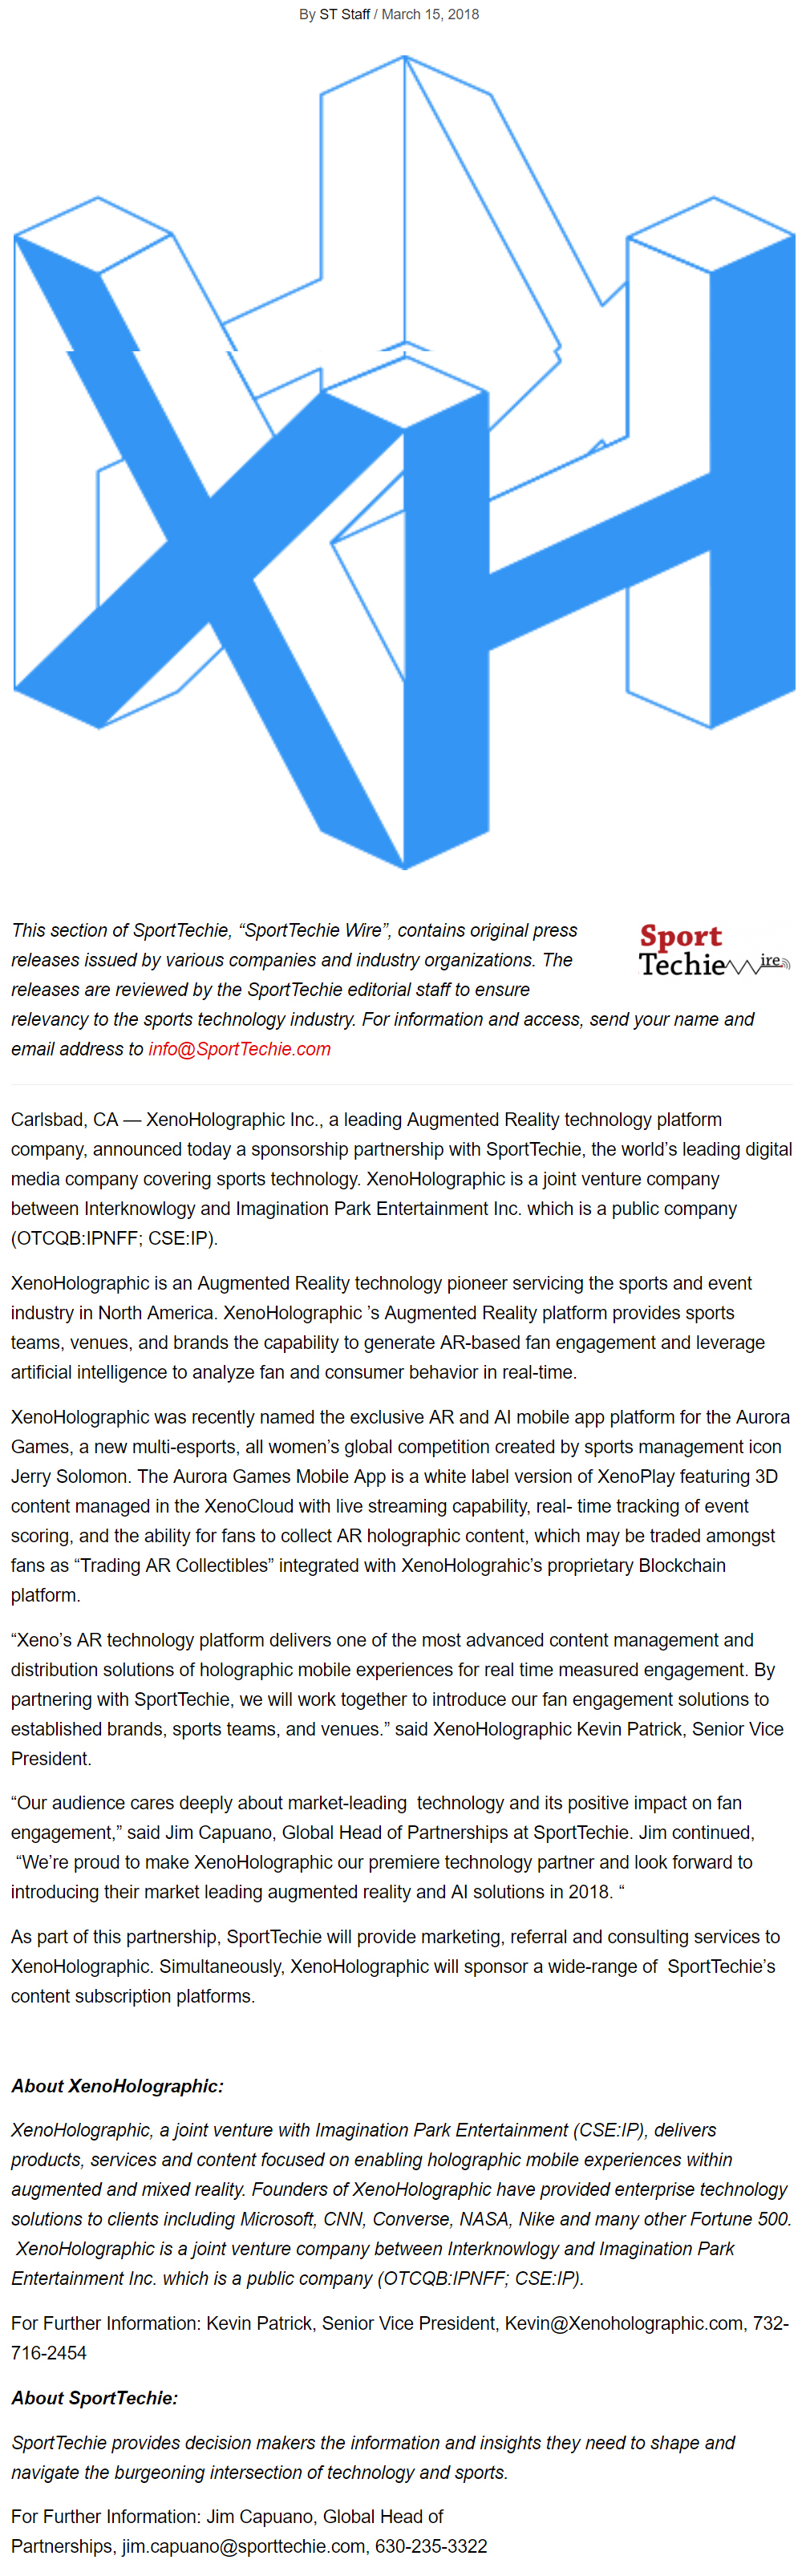 XenoHolographic Executes Strategic Partnership with SportTechie; Introducing Augmented Reality Platform to Sports Teams, Arenas and International Brands